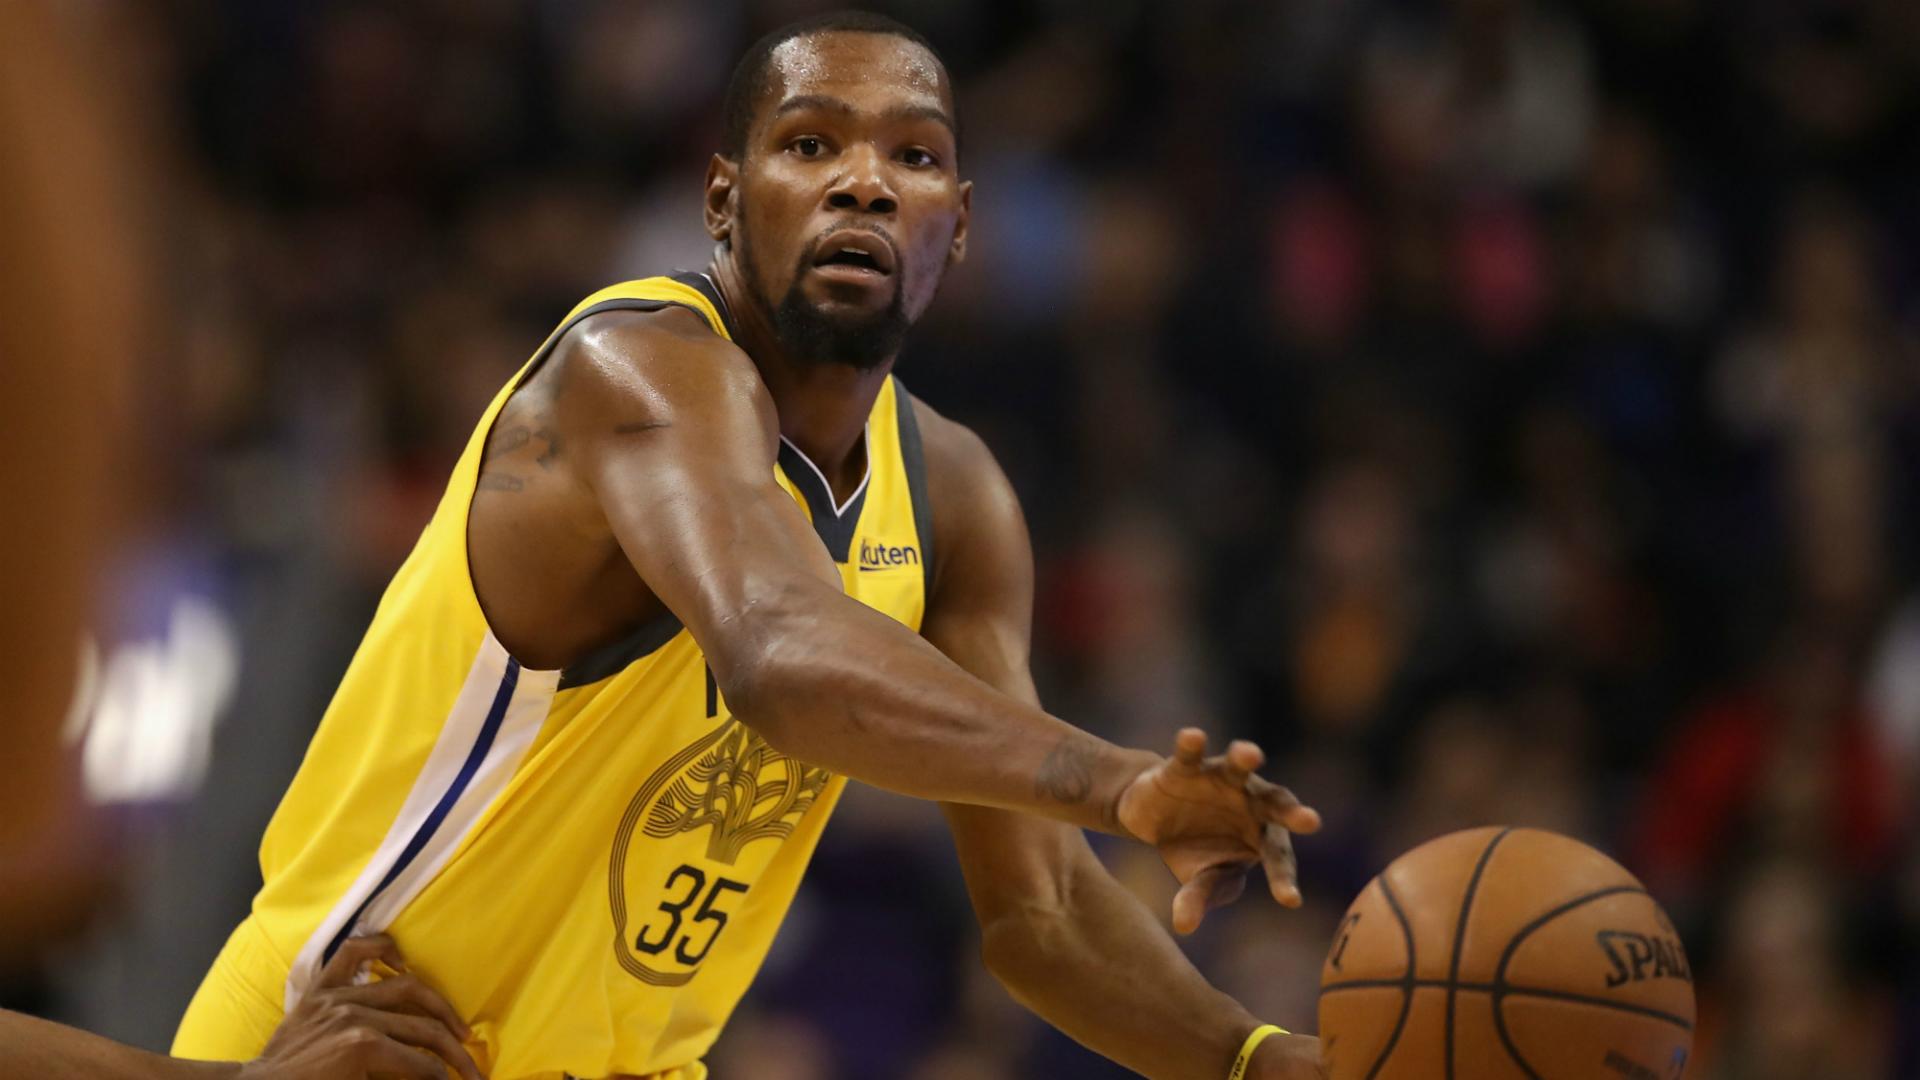 Kevin Durant injury update: Warriors F out vs. Rockets